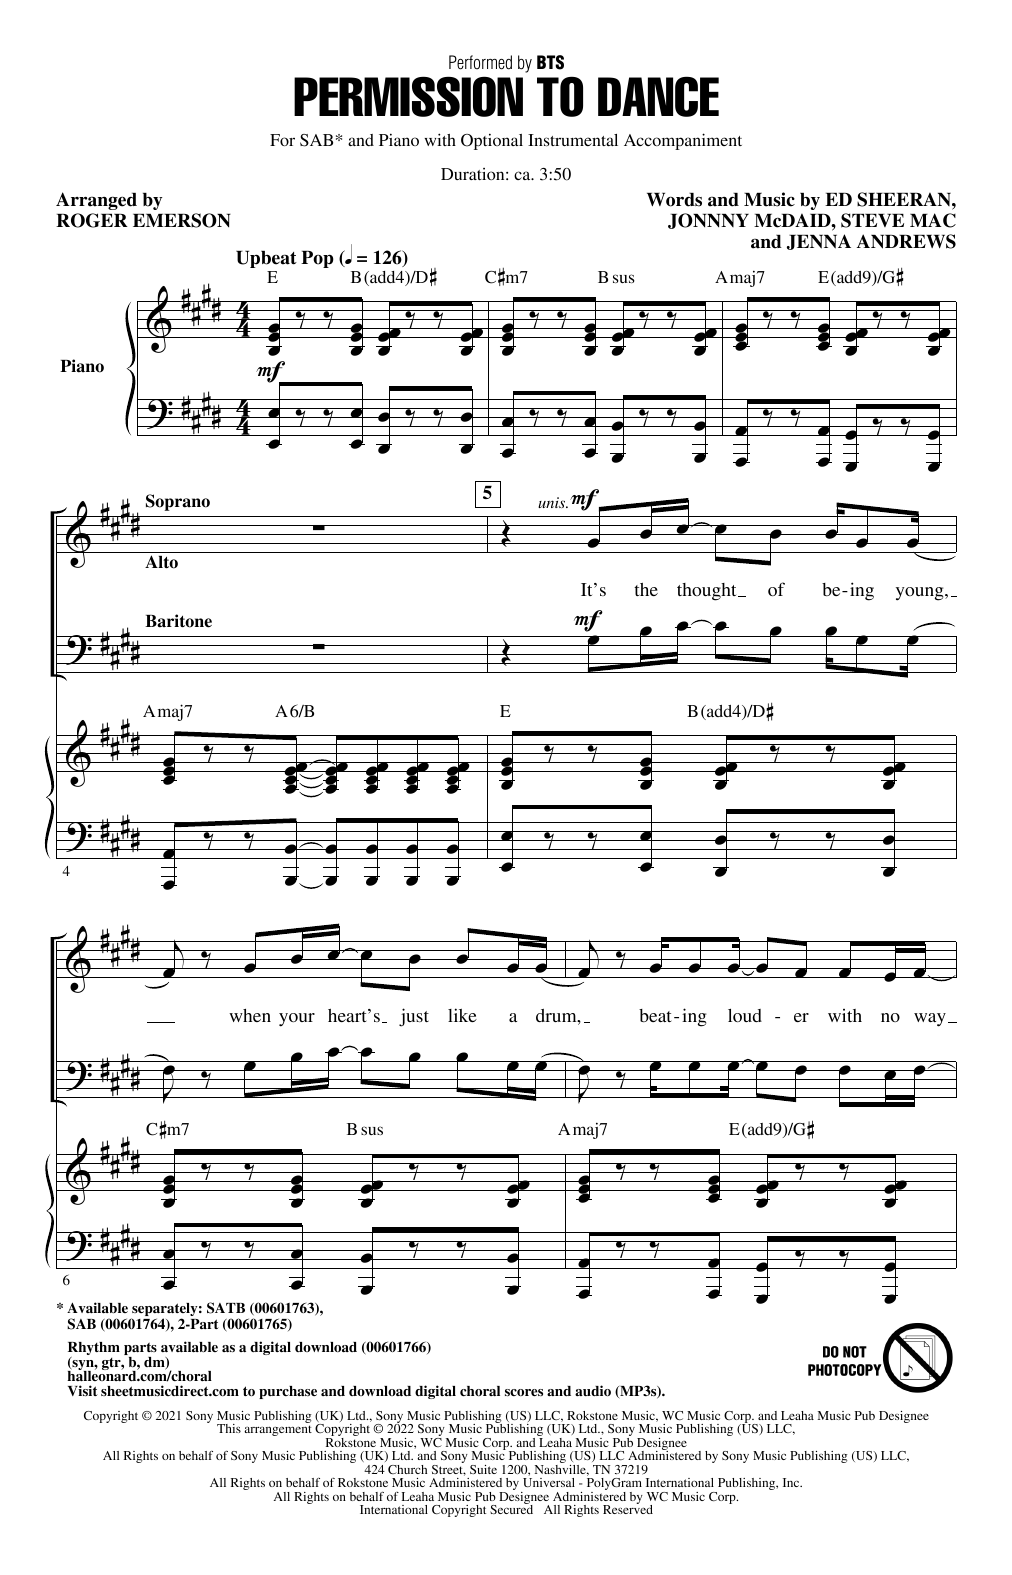 BTS Permission To Dance (arr. Roger Emerson) sheet music notes and chords. Download Printable PDF.